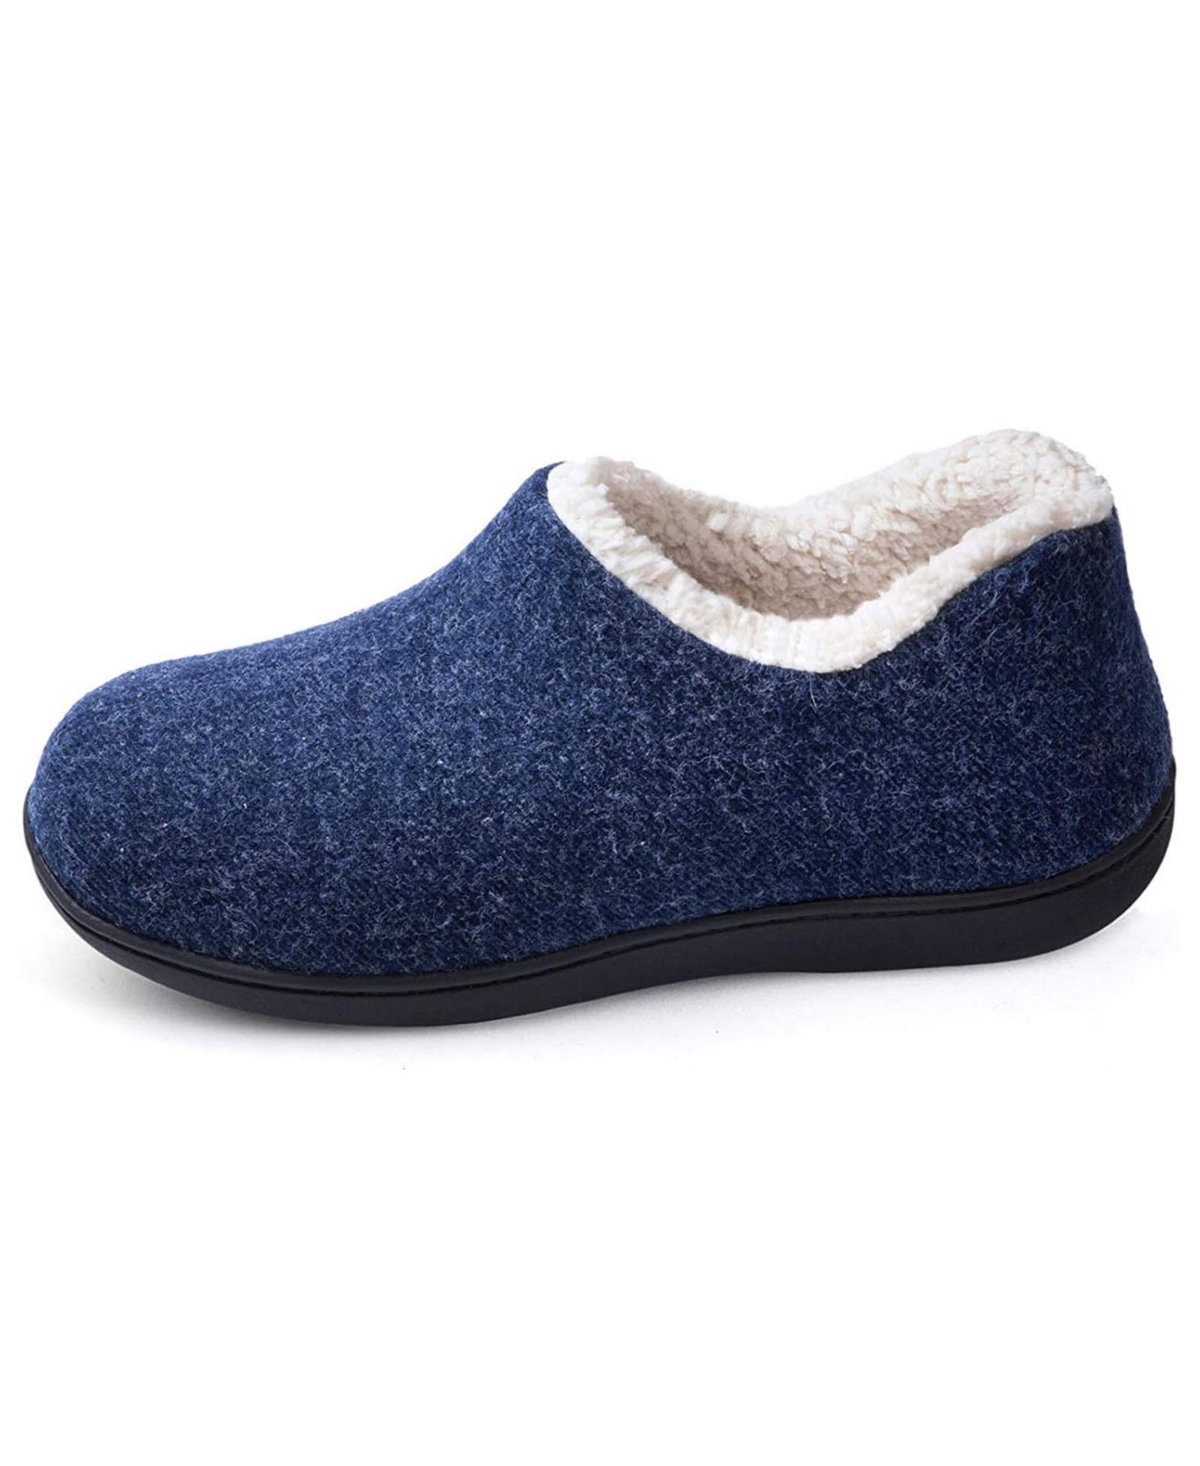 Rock Dove Women's Madison Ankle Bootie - Navy blue